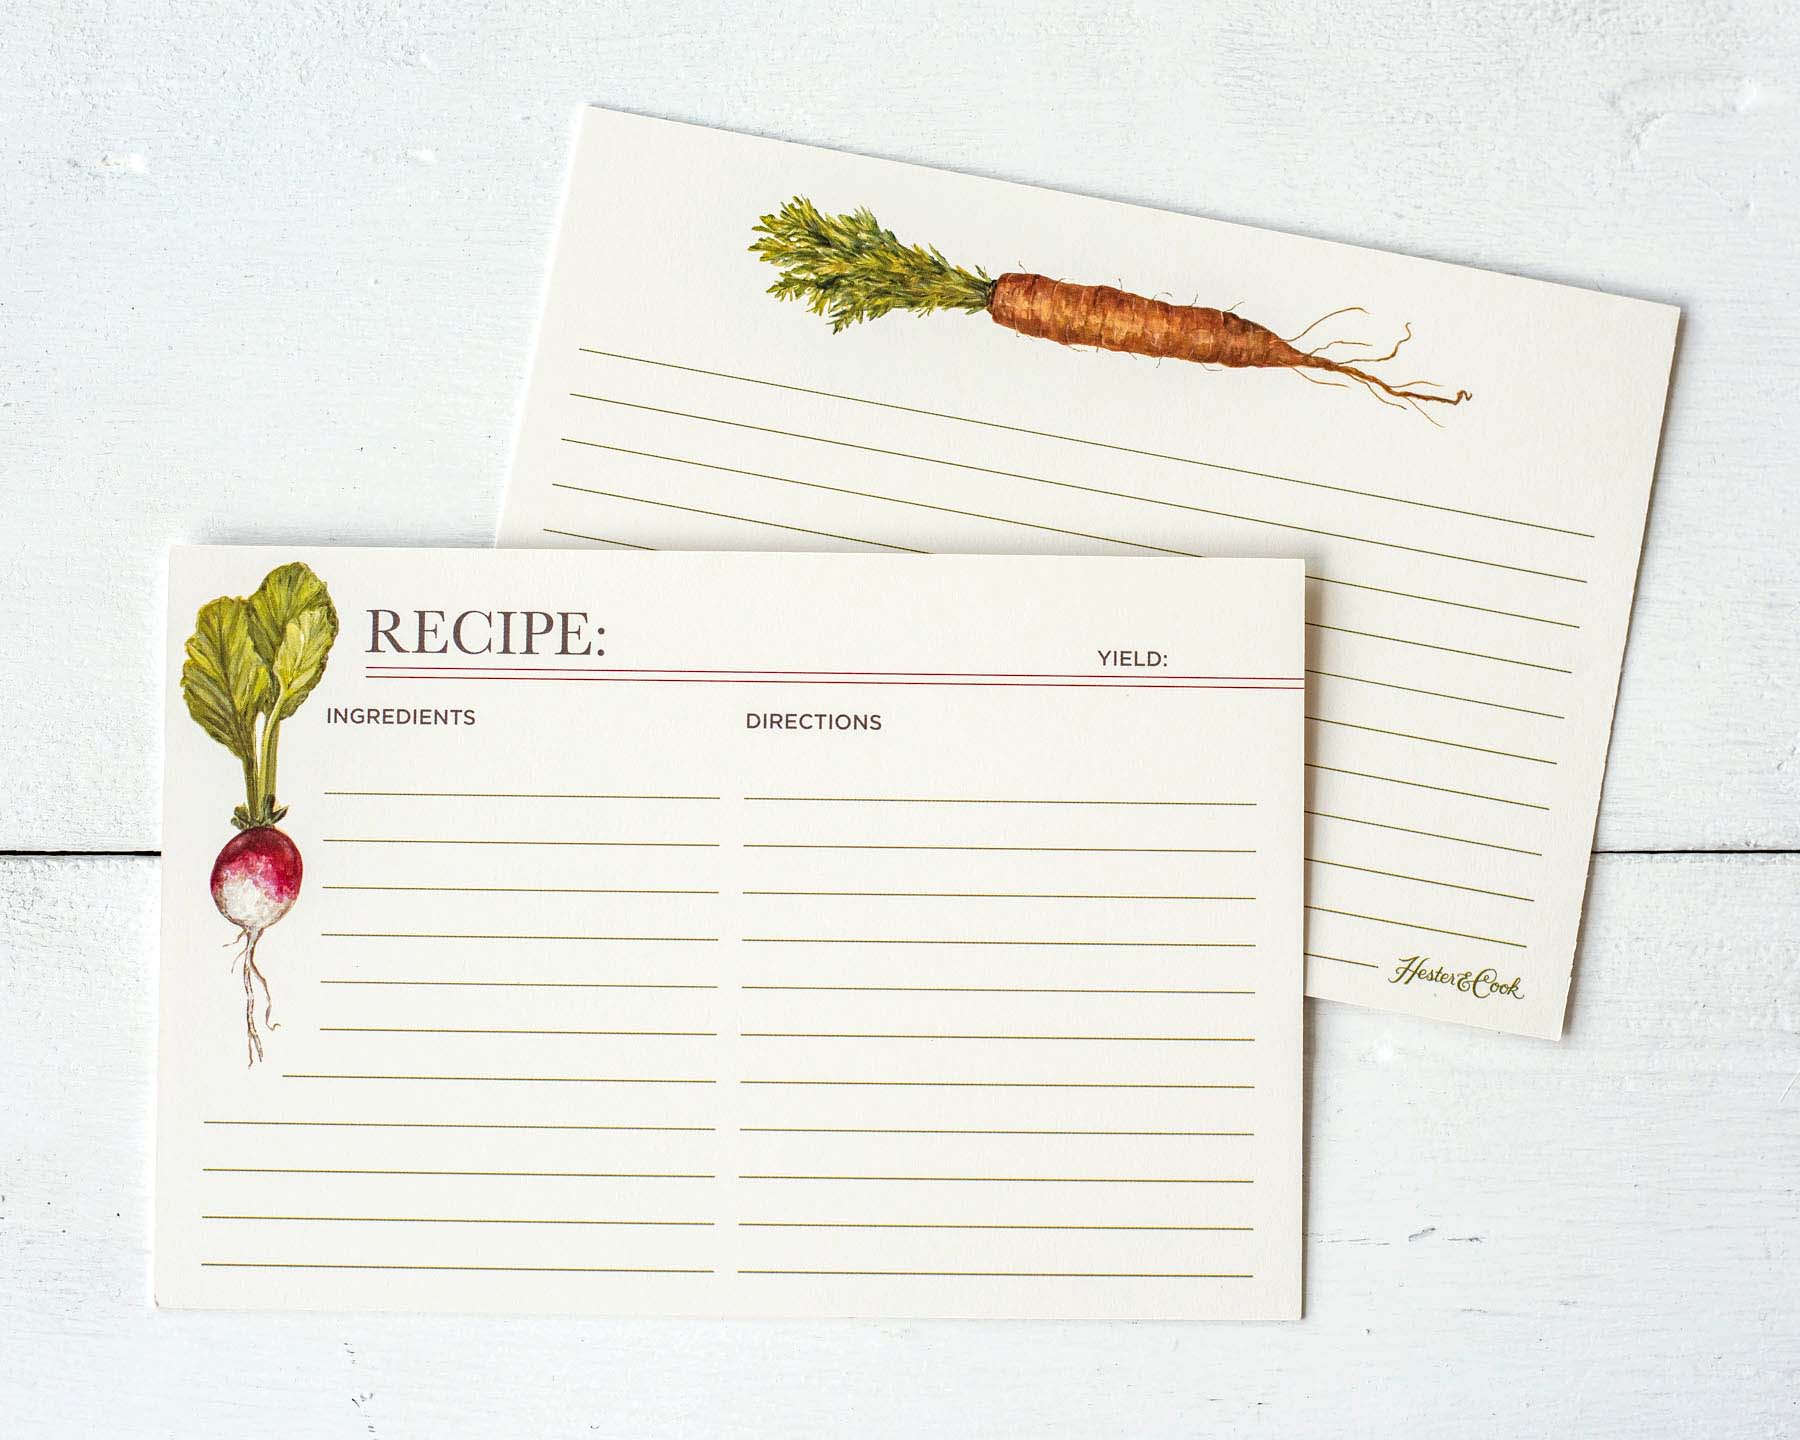 Both sides of a lined recipe card with space for ingredients and directions on the front, with more lined space on the back. The front of the card is adorned with a white and purple turnip with green leaves on the left side, and the back is adorned with an orange carrot with green leaves across the top.